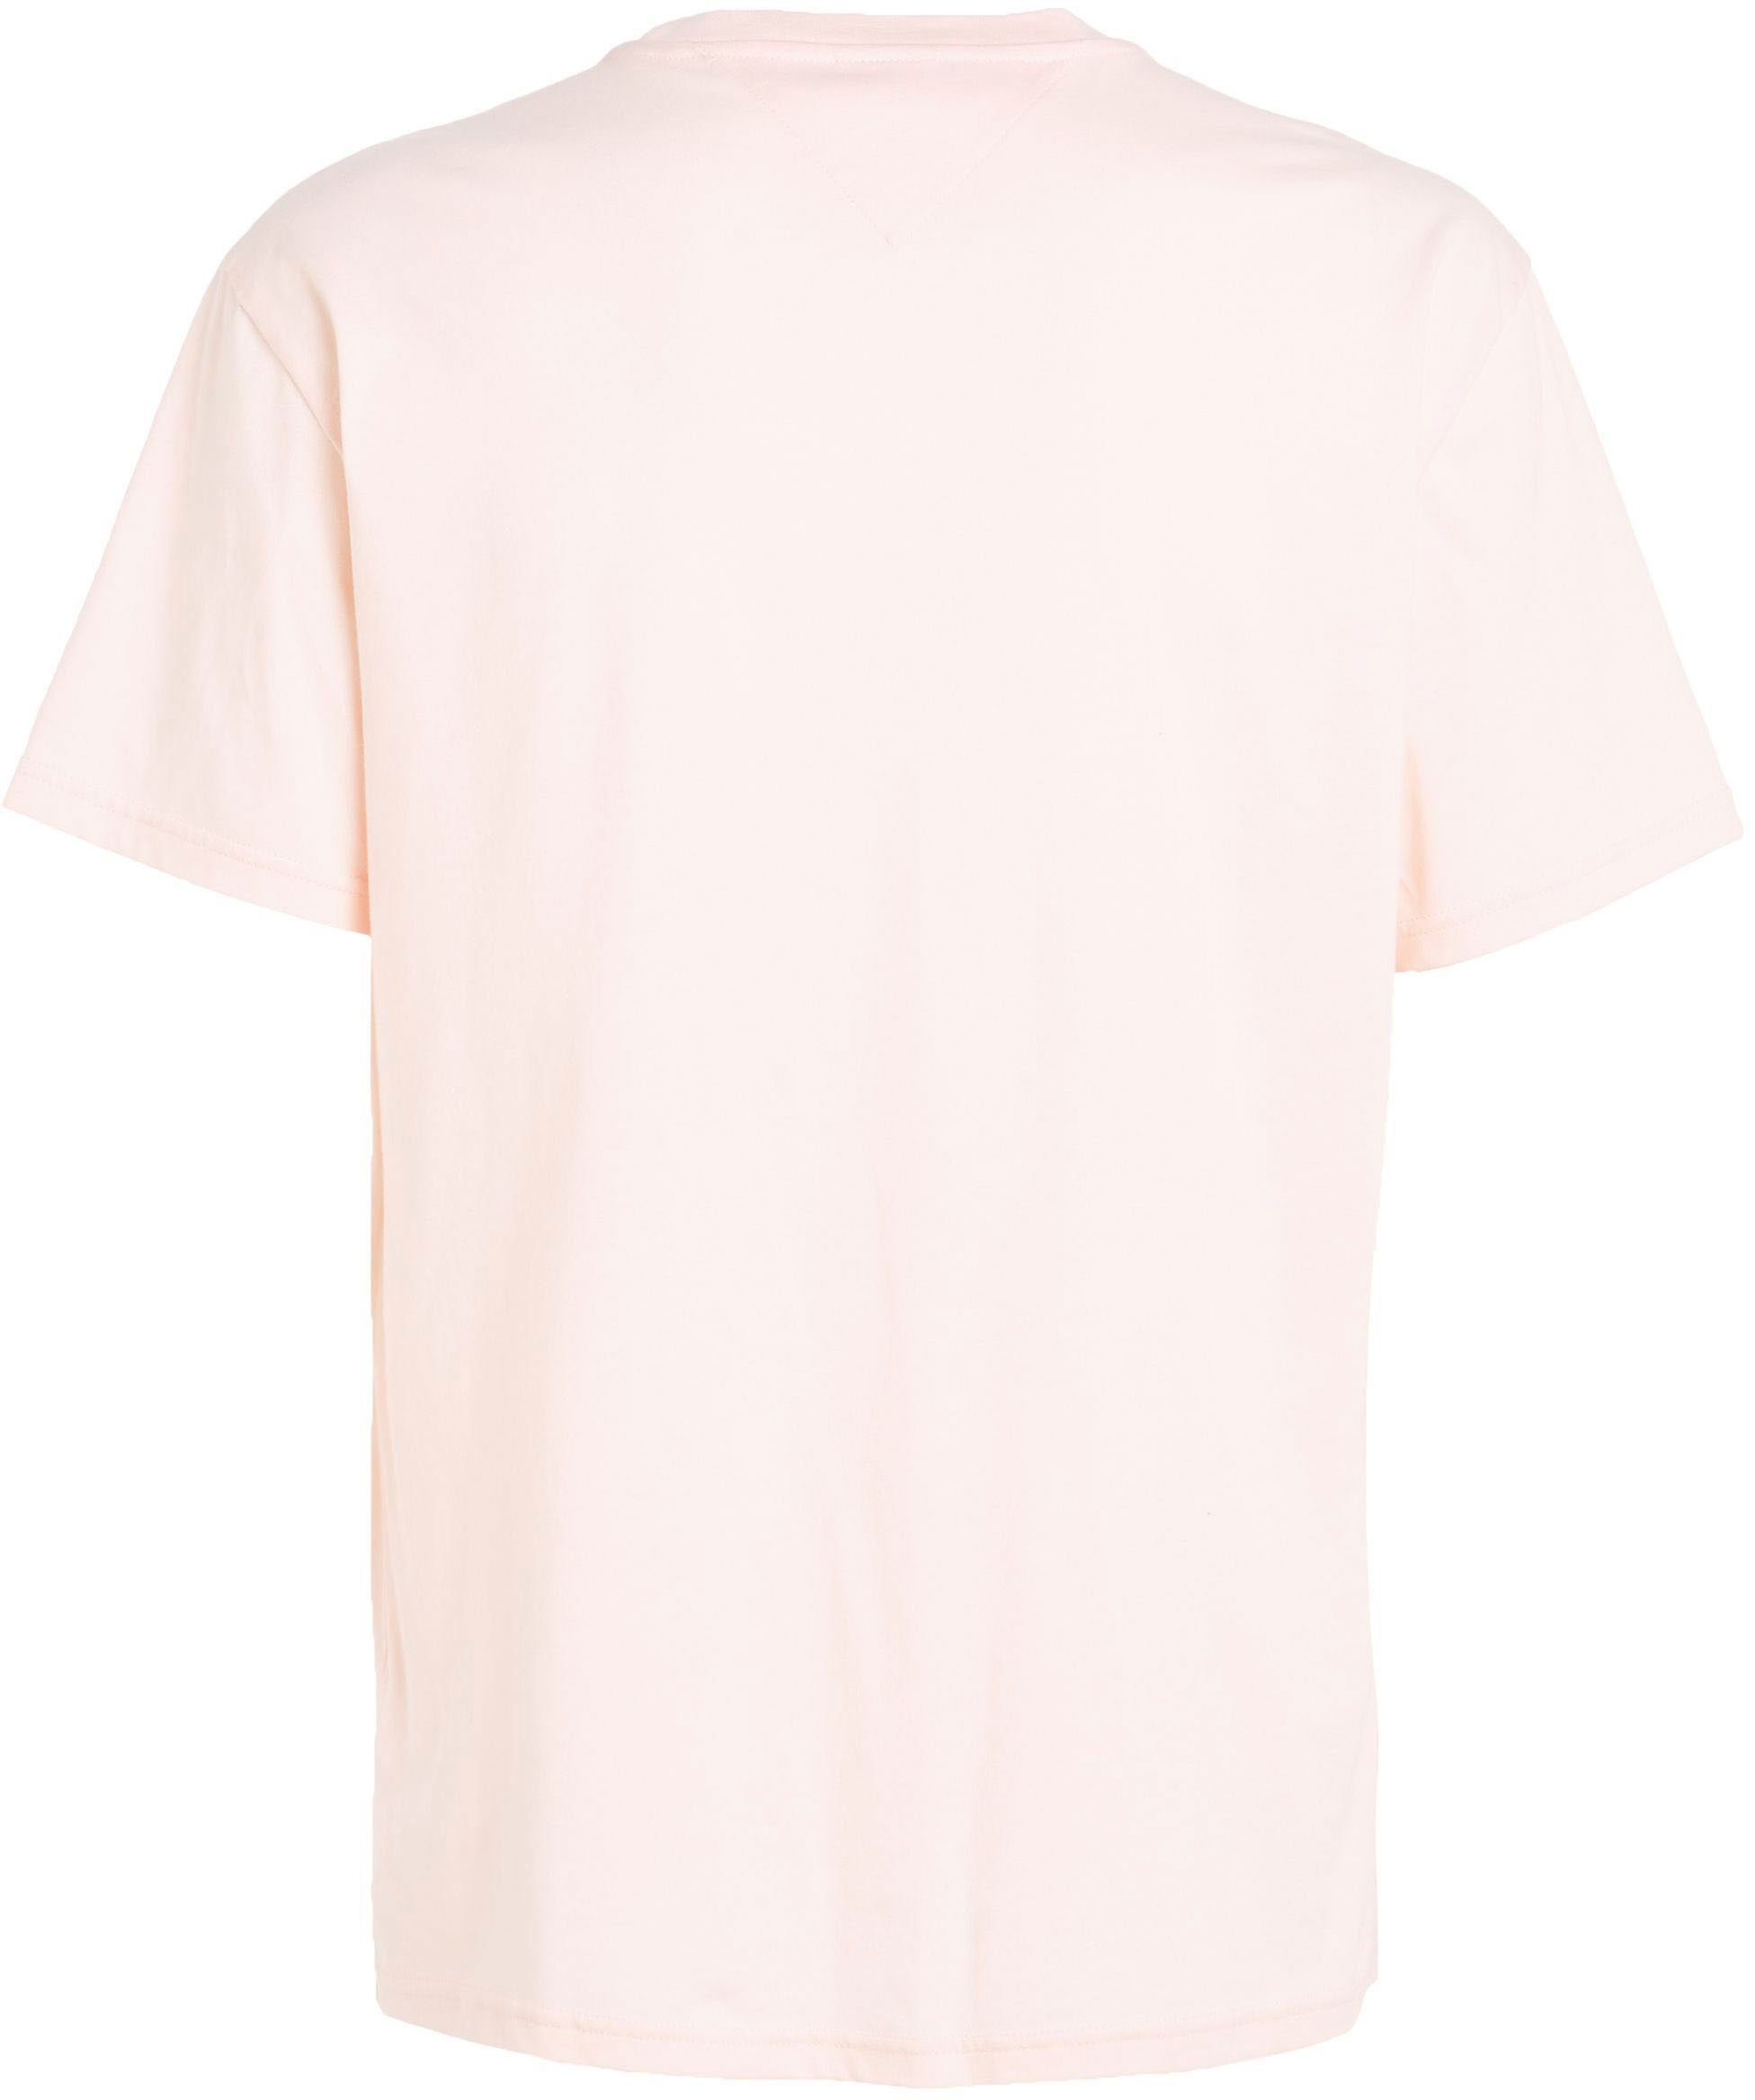 Tommy Jeans Faint Pink TEXT TJM T-Shirt SMALL TEE CLSC